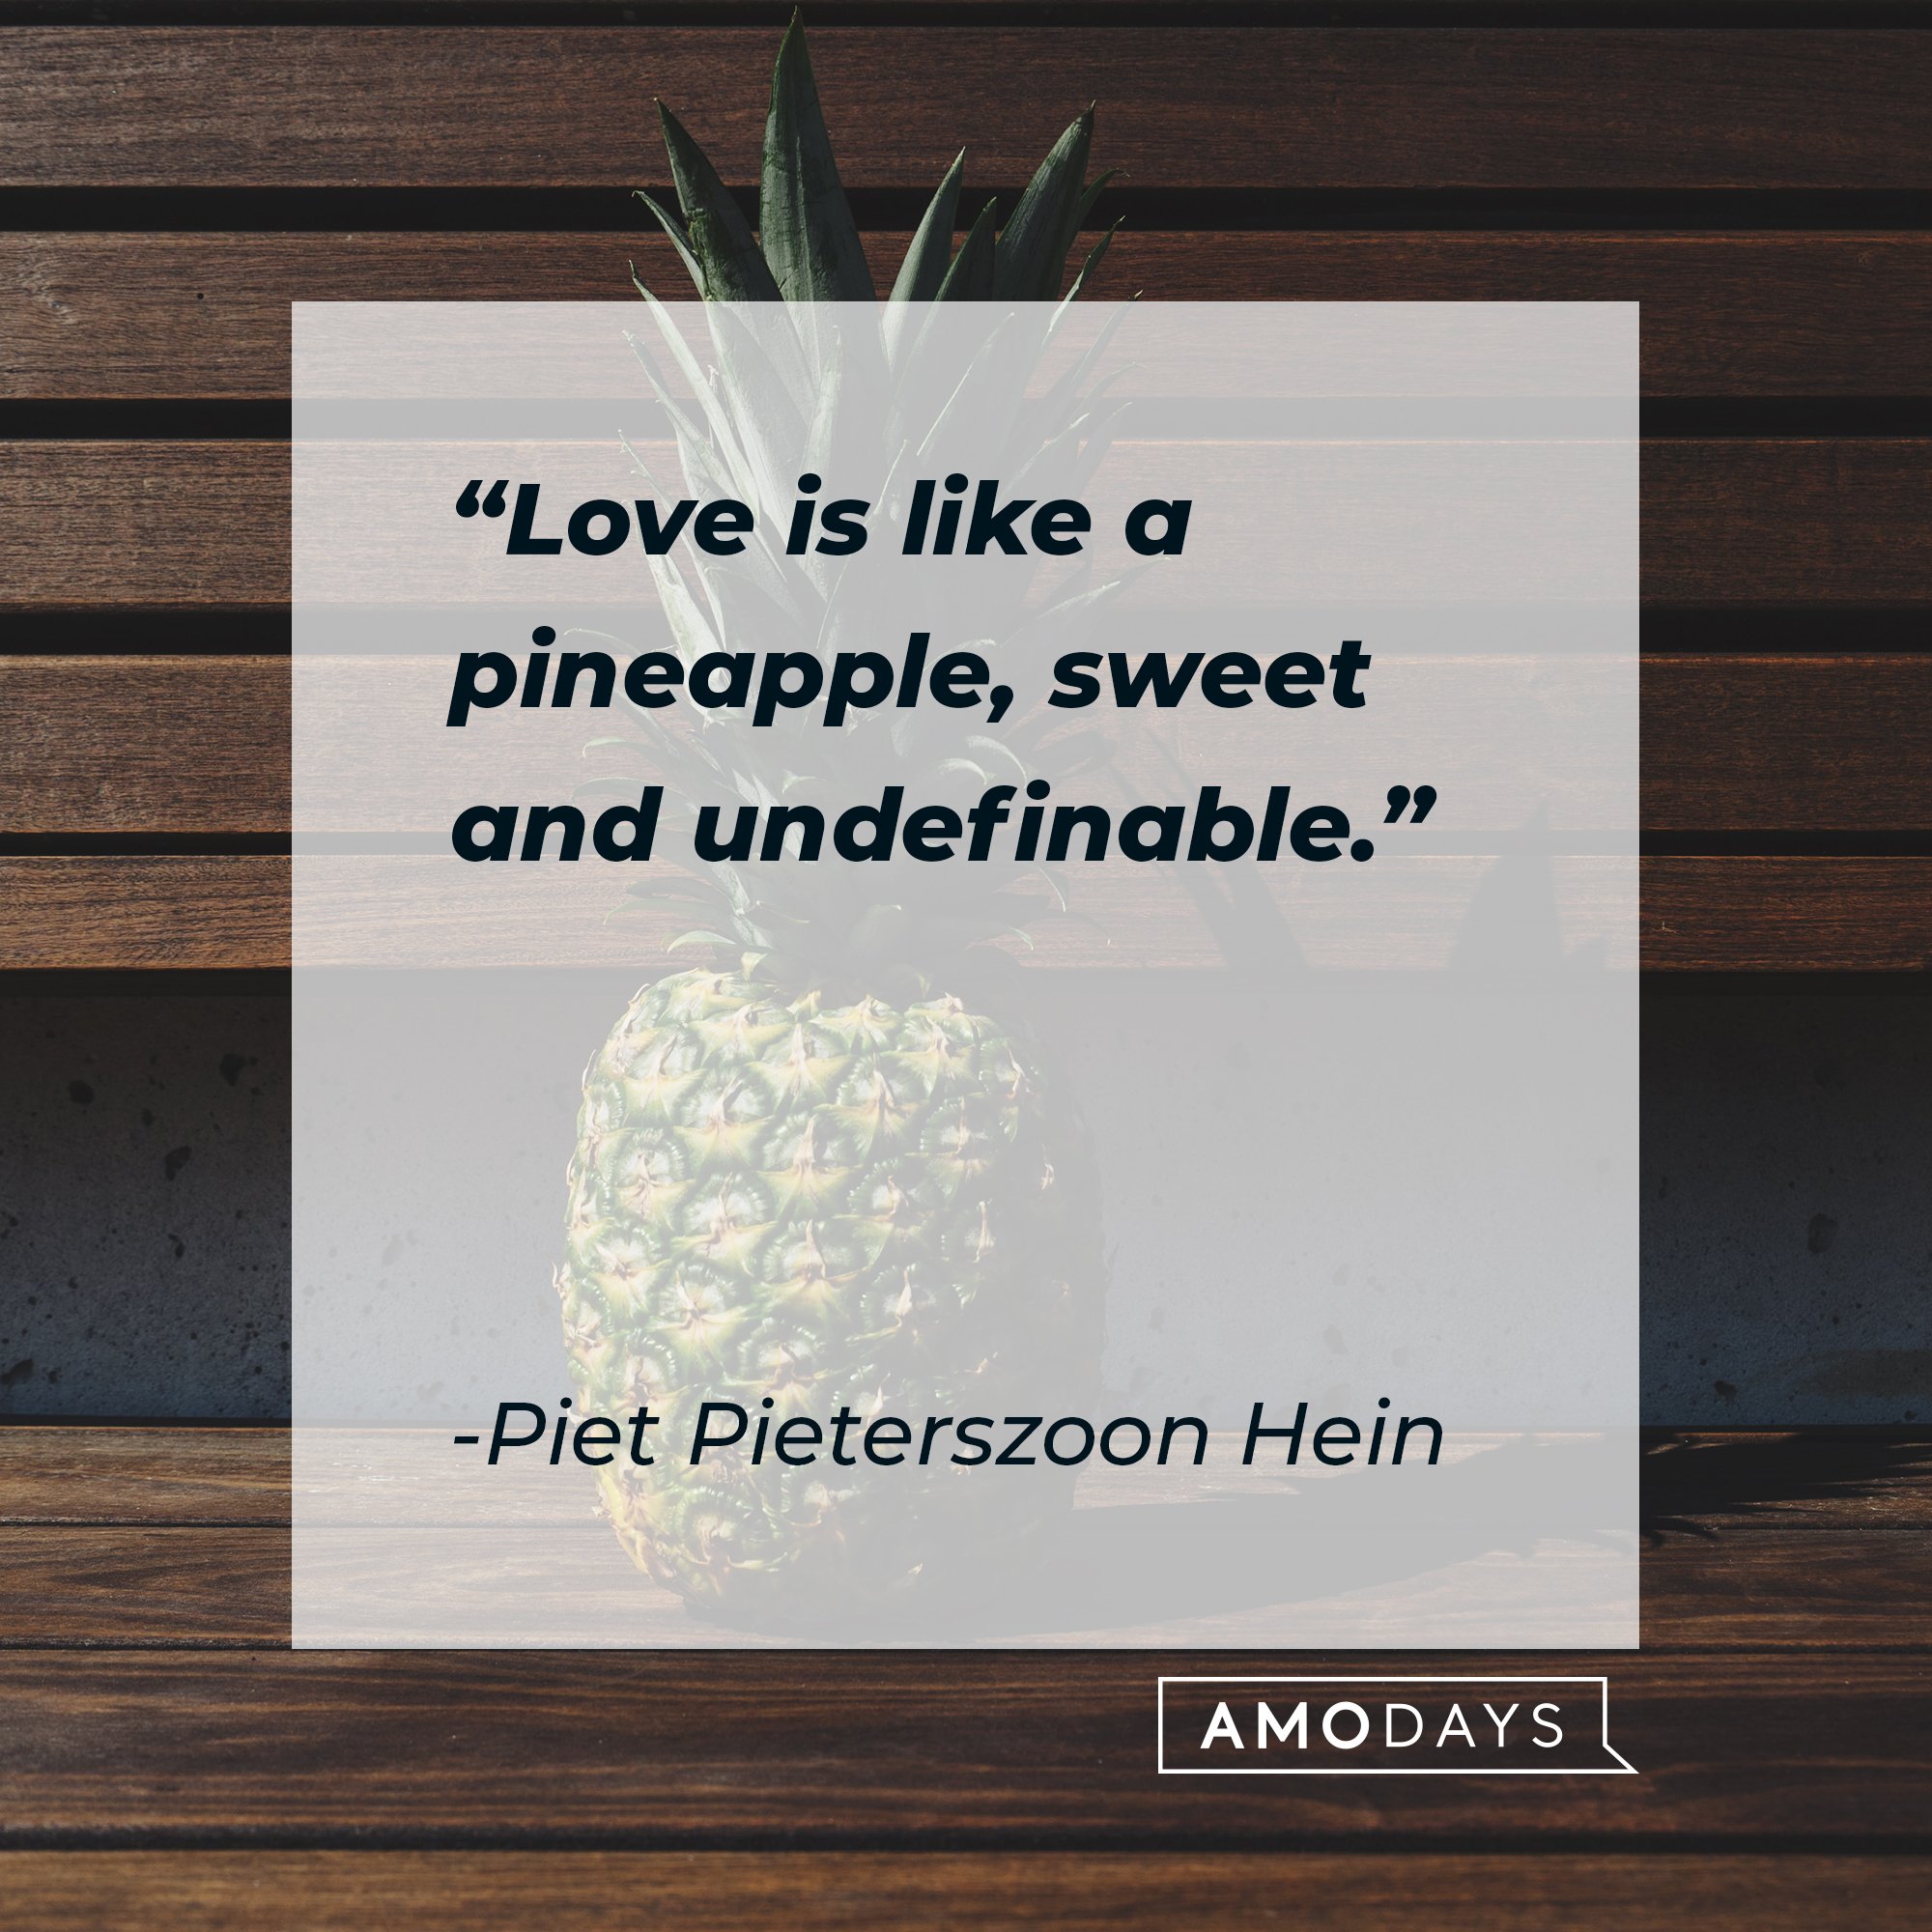 Piet Pieterszoon Hein's quote: "Love is like a pineapple, sweet and undefinable." | Image: AmoDays